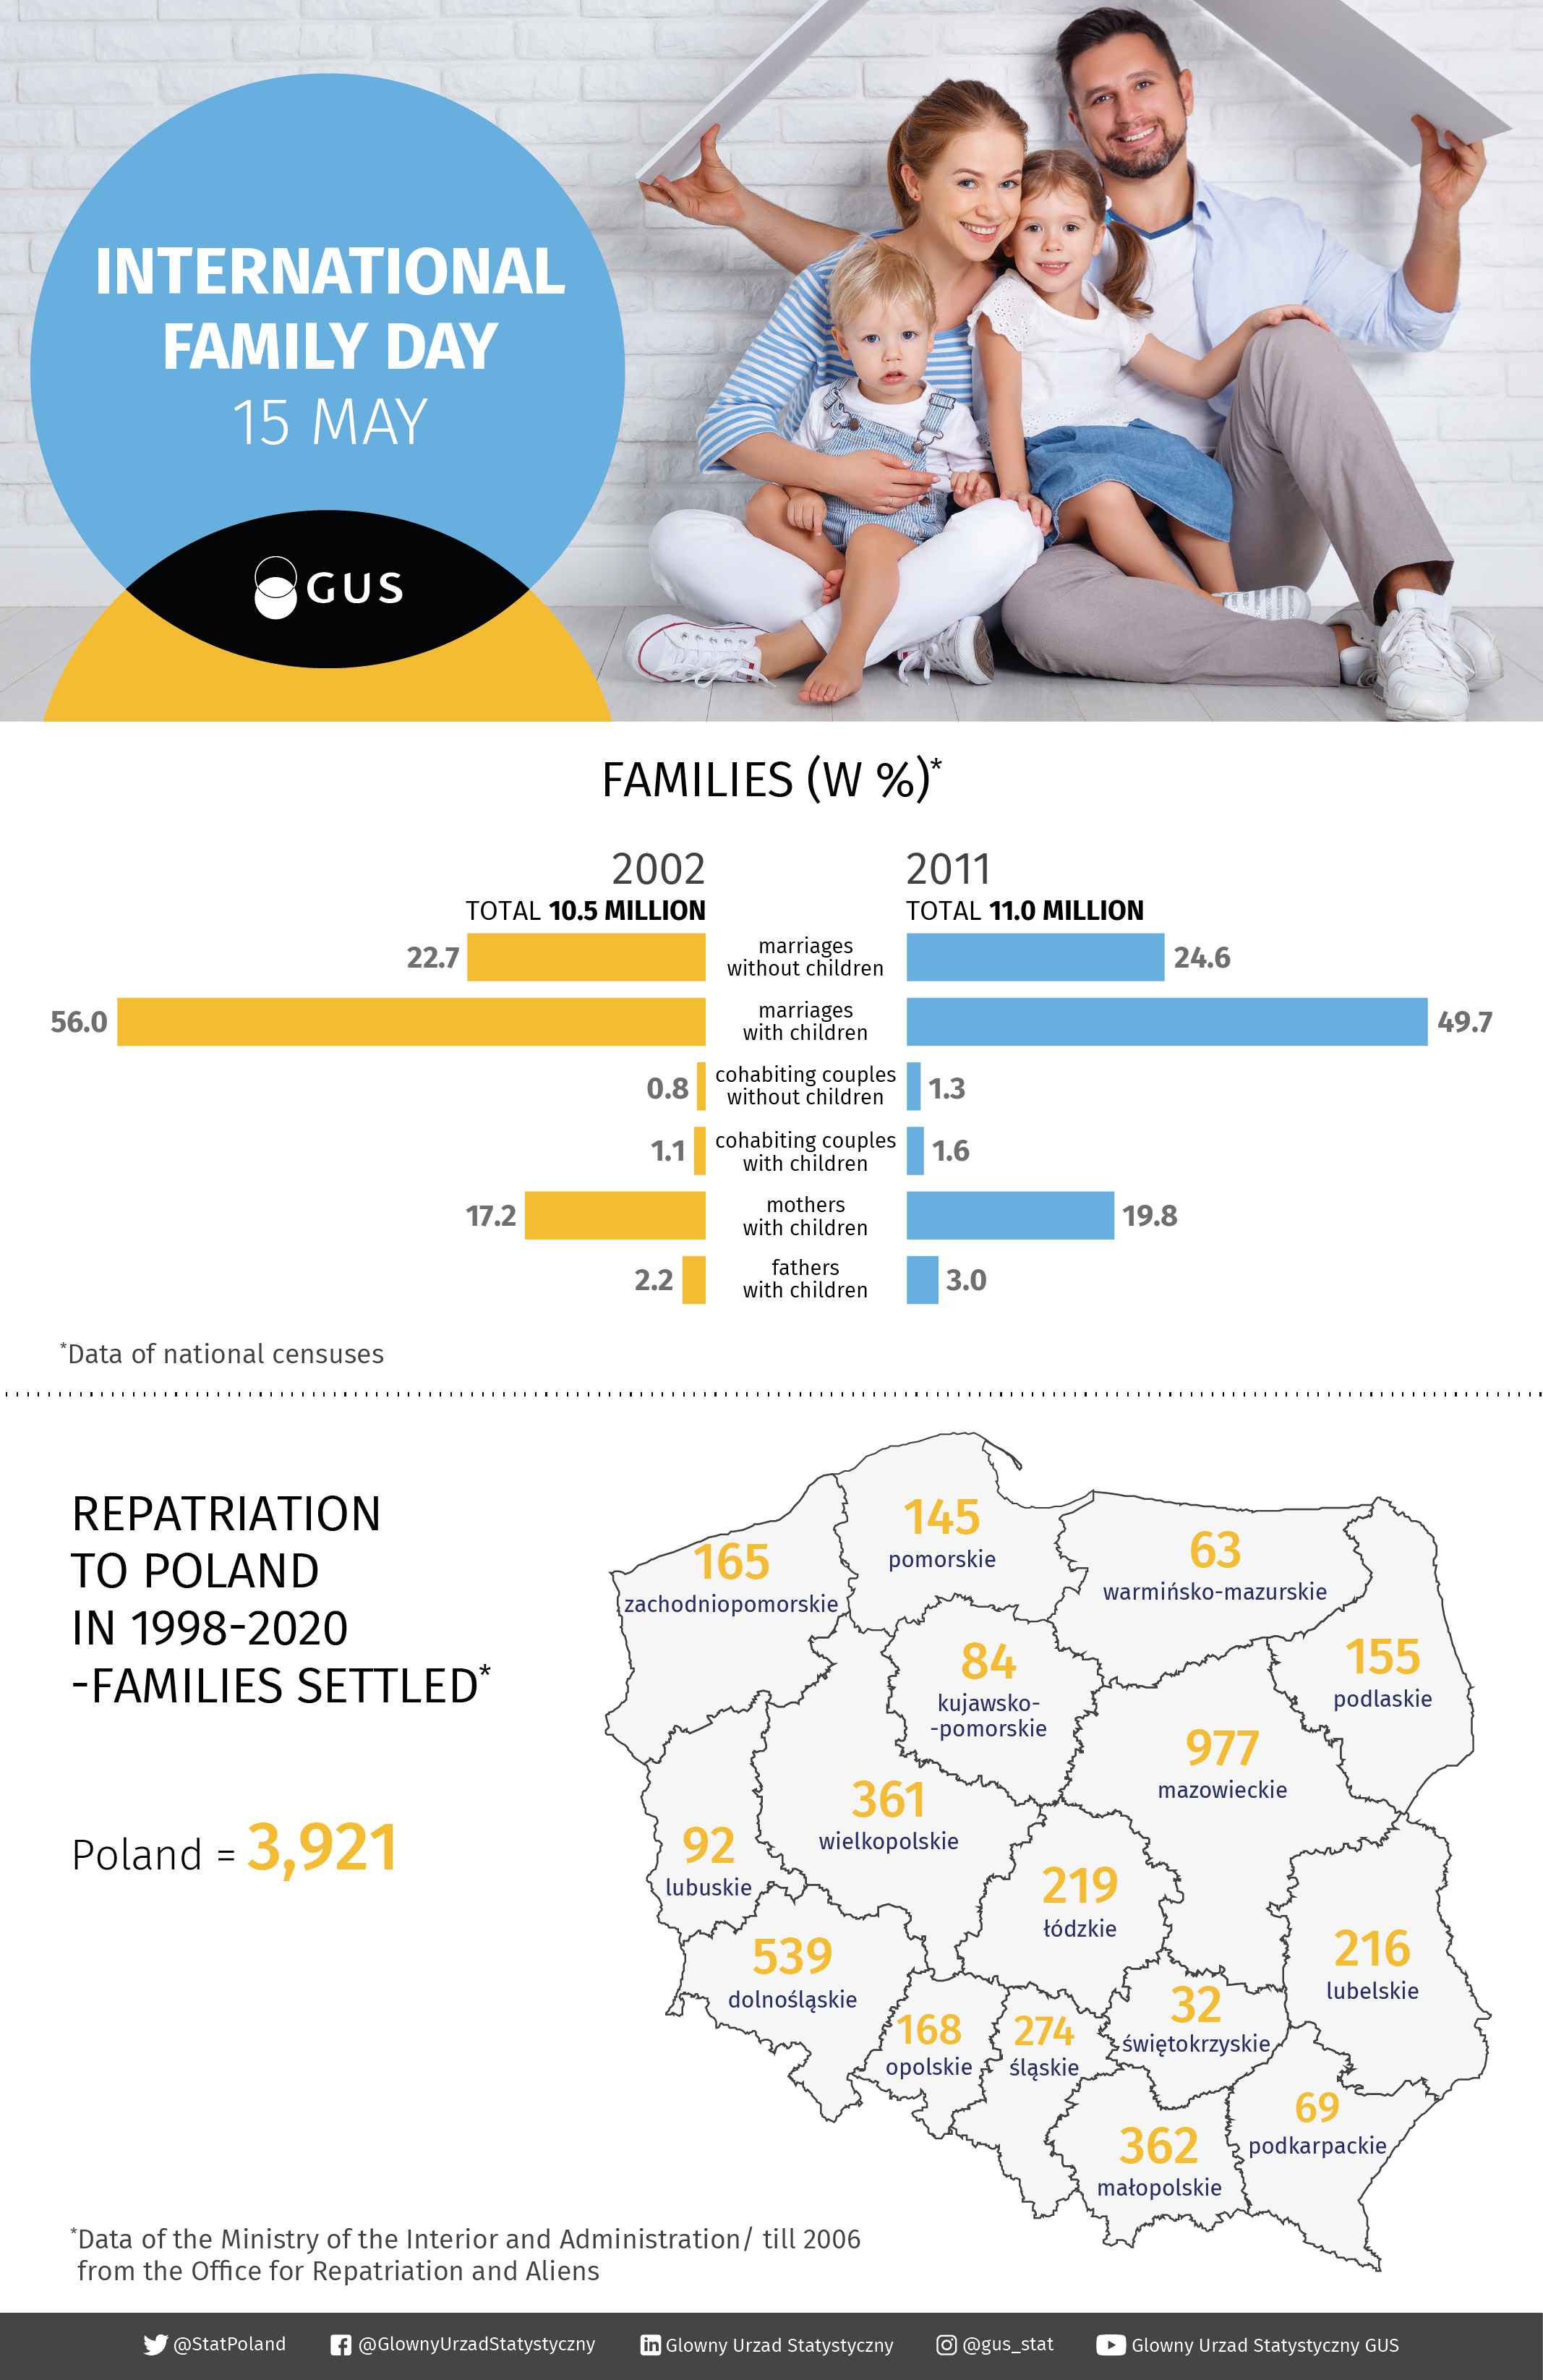 Infographic - International Family Day 15 May